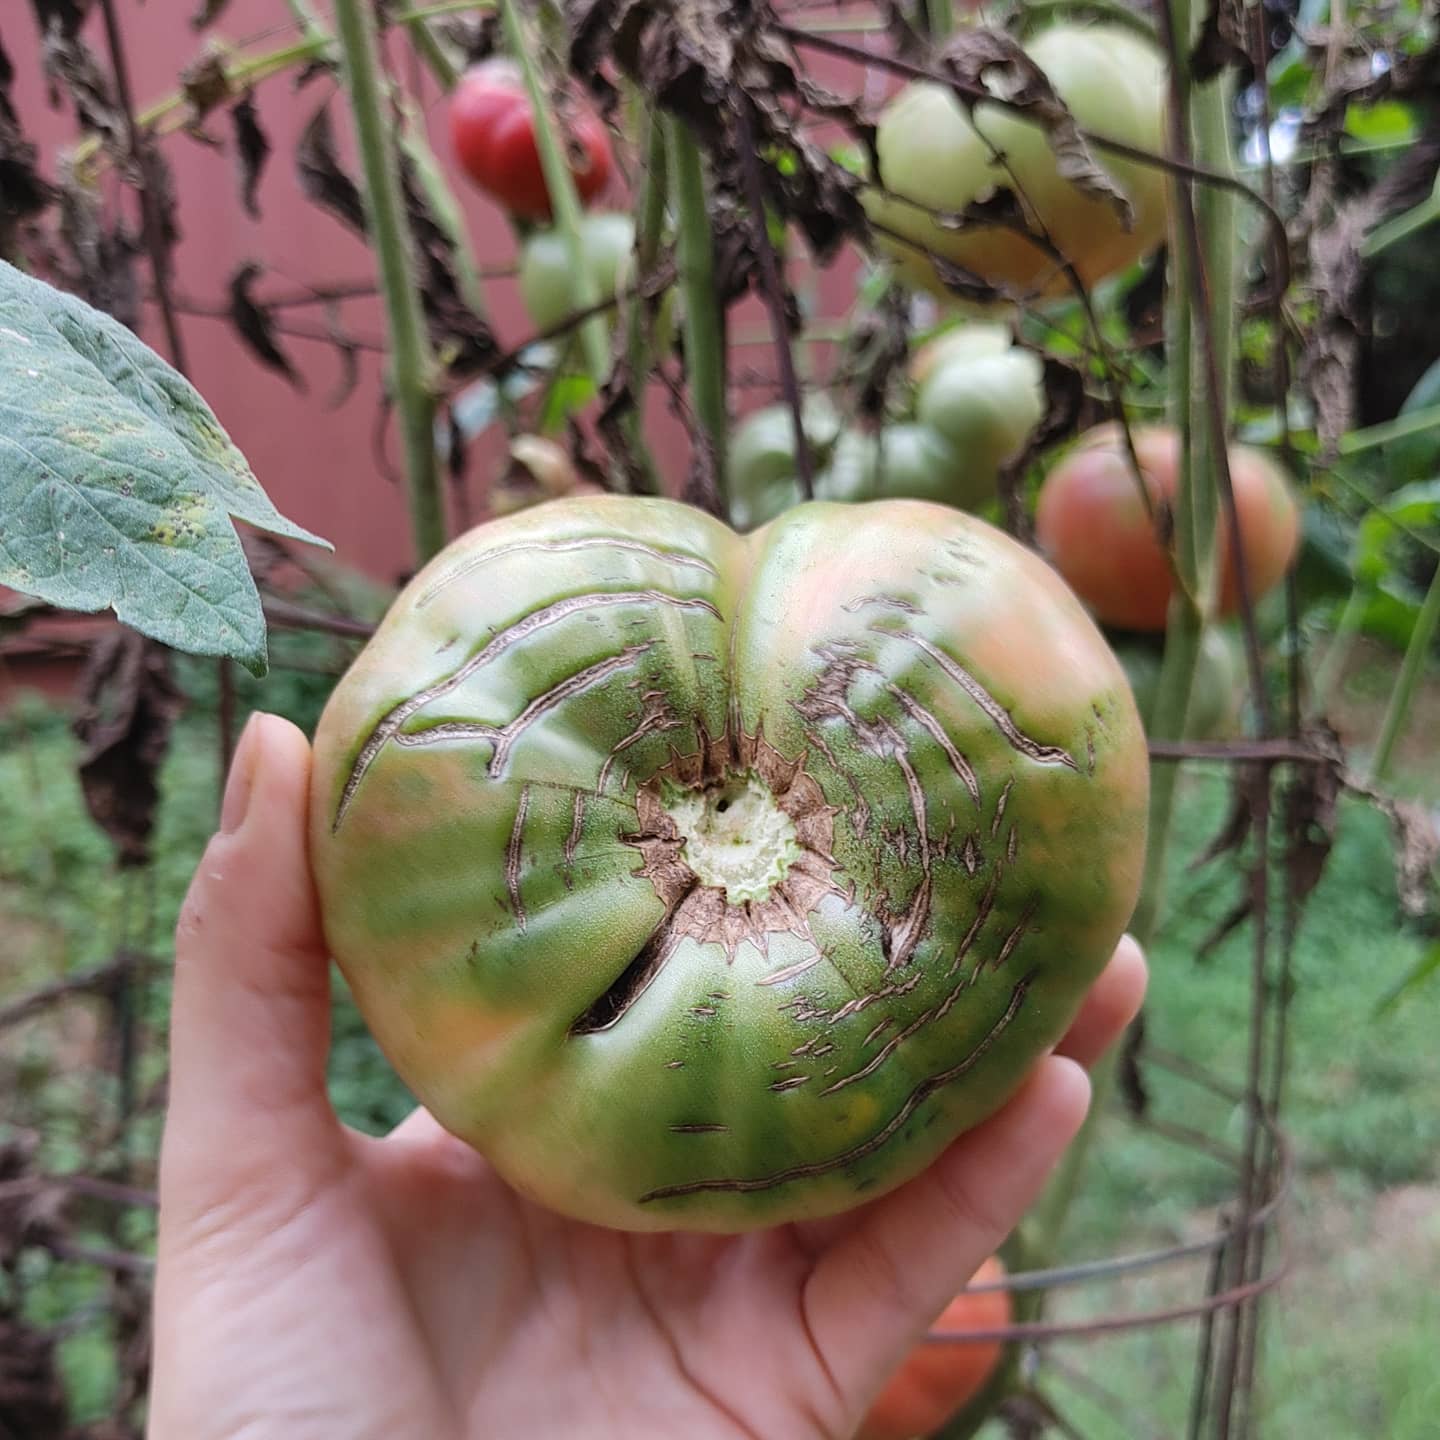 The uglier, the tastier! It's been a terrible year for my tomatoes but I'll keep trying. This is some sort of pink tomato that is just now ripening. I think it's been in the ground for months!